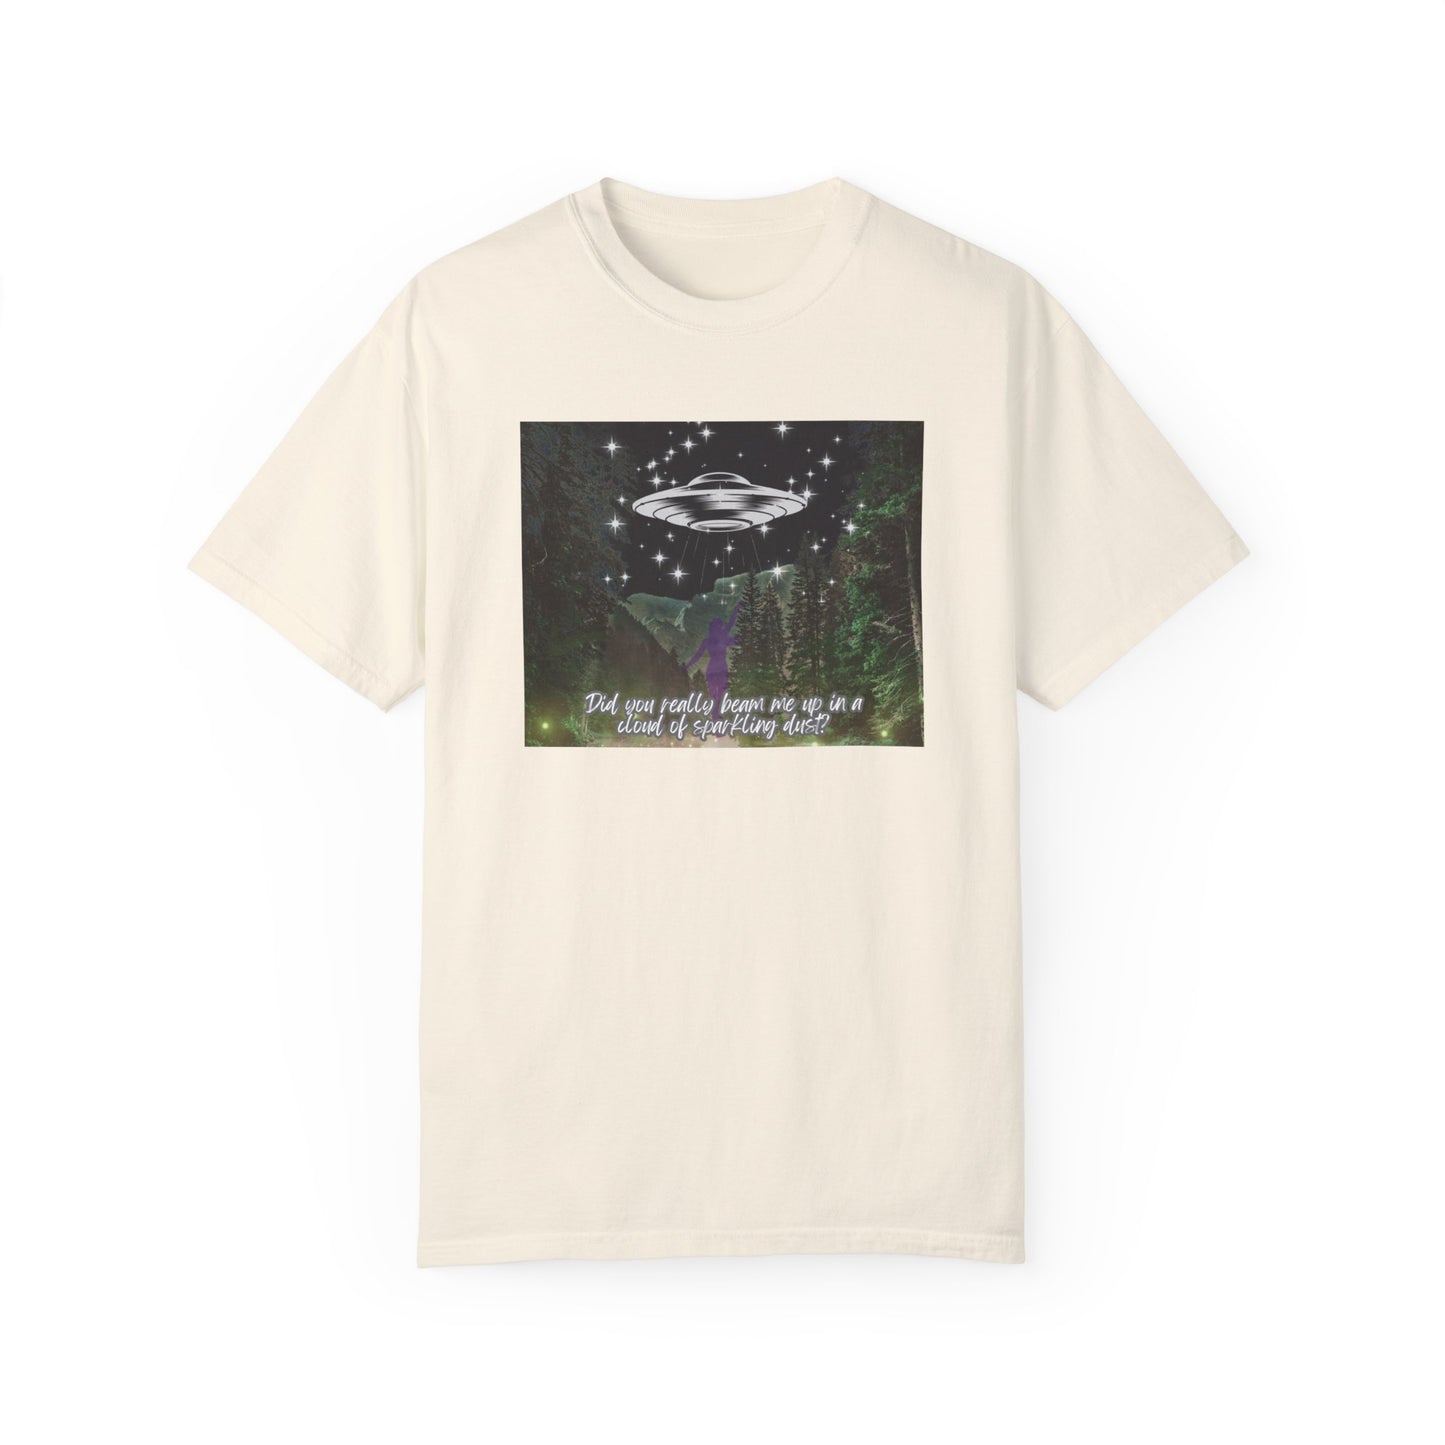 Did You Really Beam Me Up T-Shirt